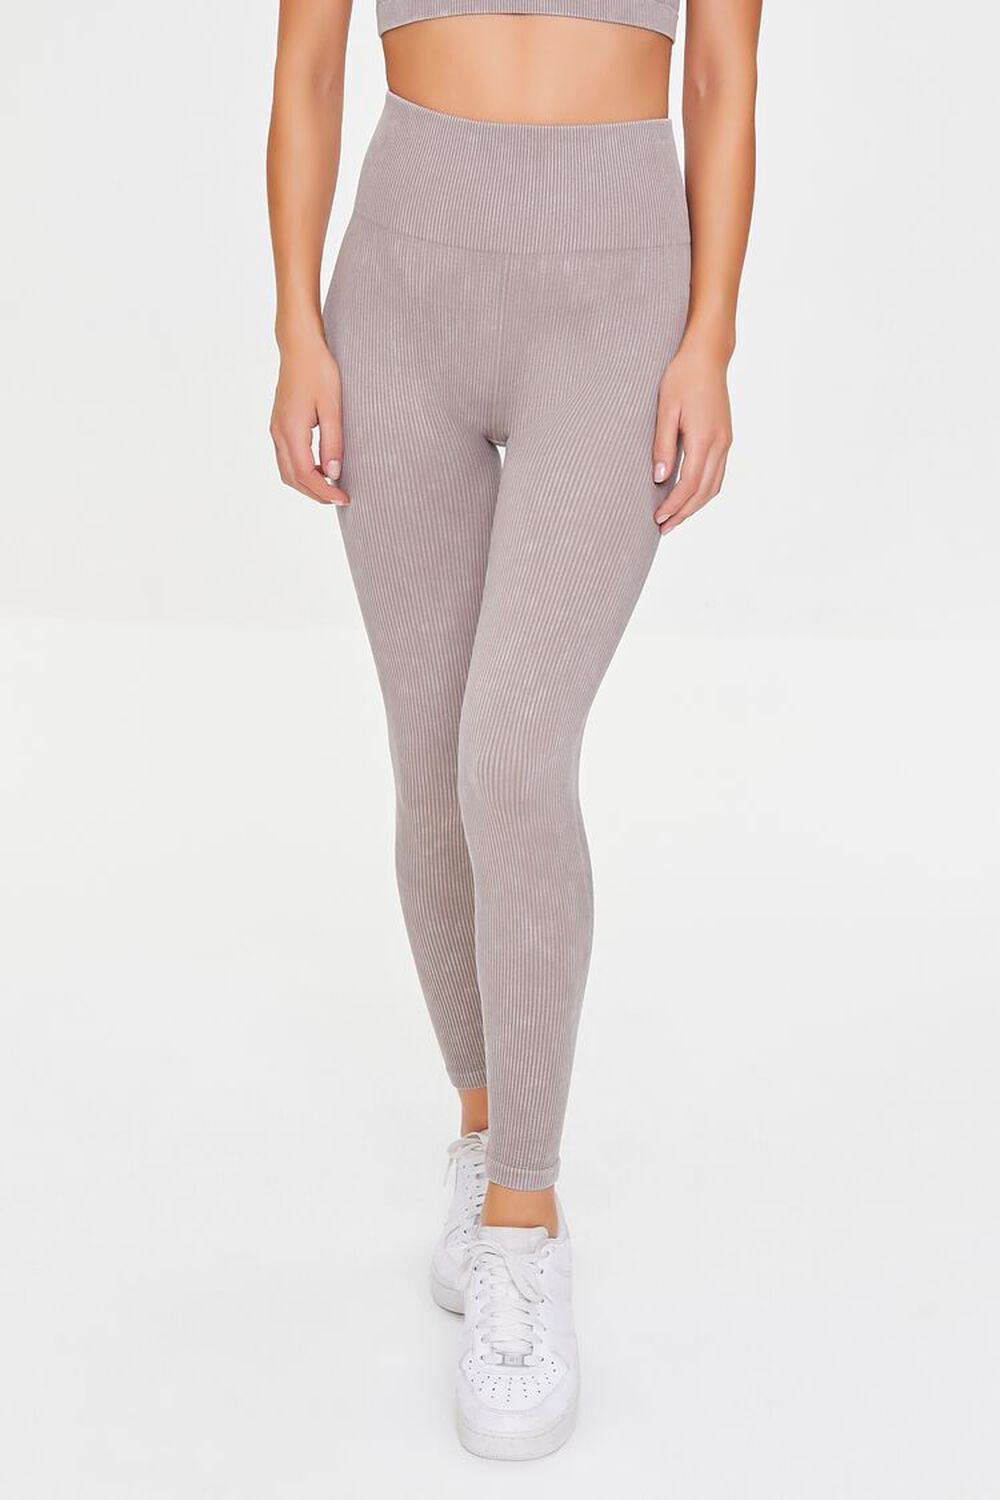 Active Seamless Thick Ribbed Leggings, image 2